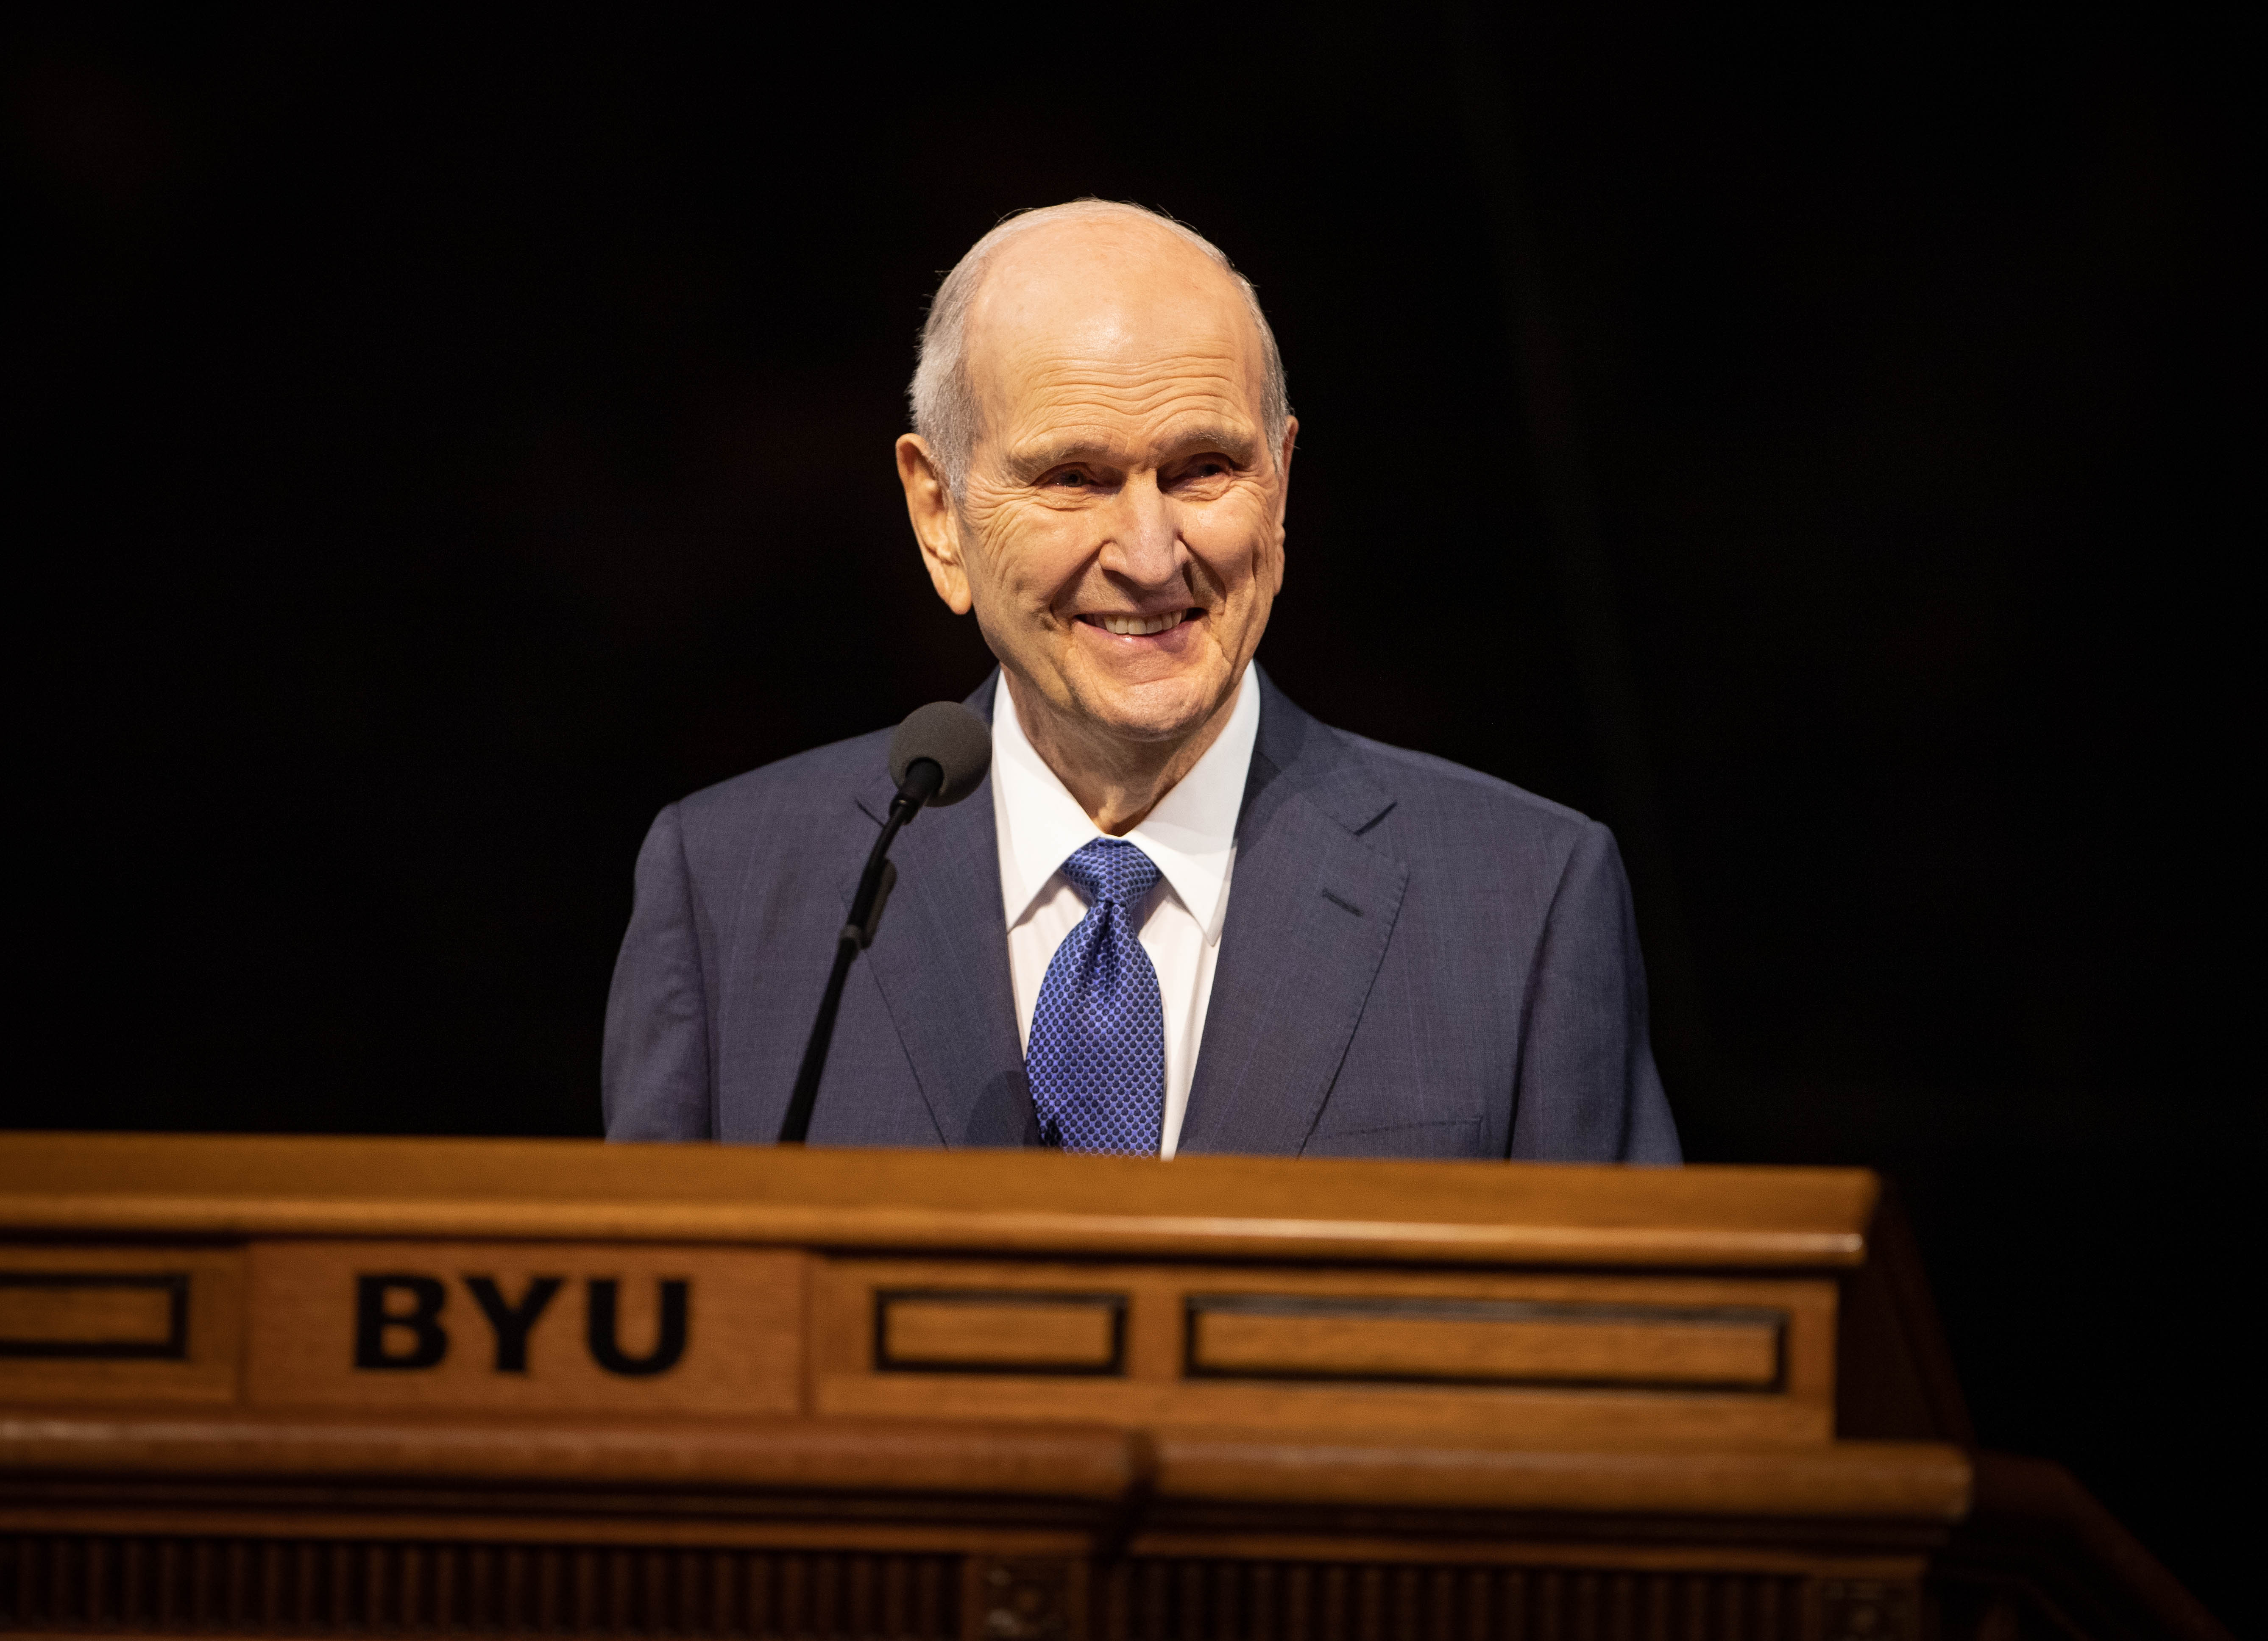 President Russell M. Nelson speaks at BYU about God's love and laws